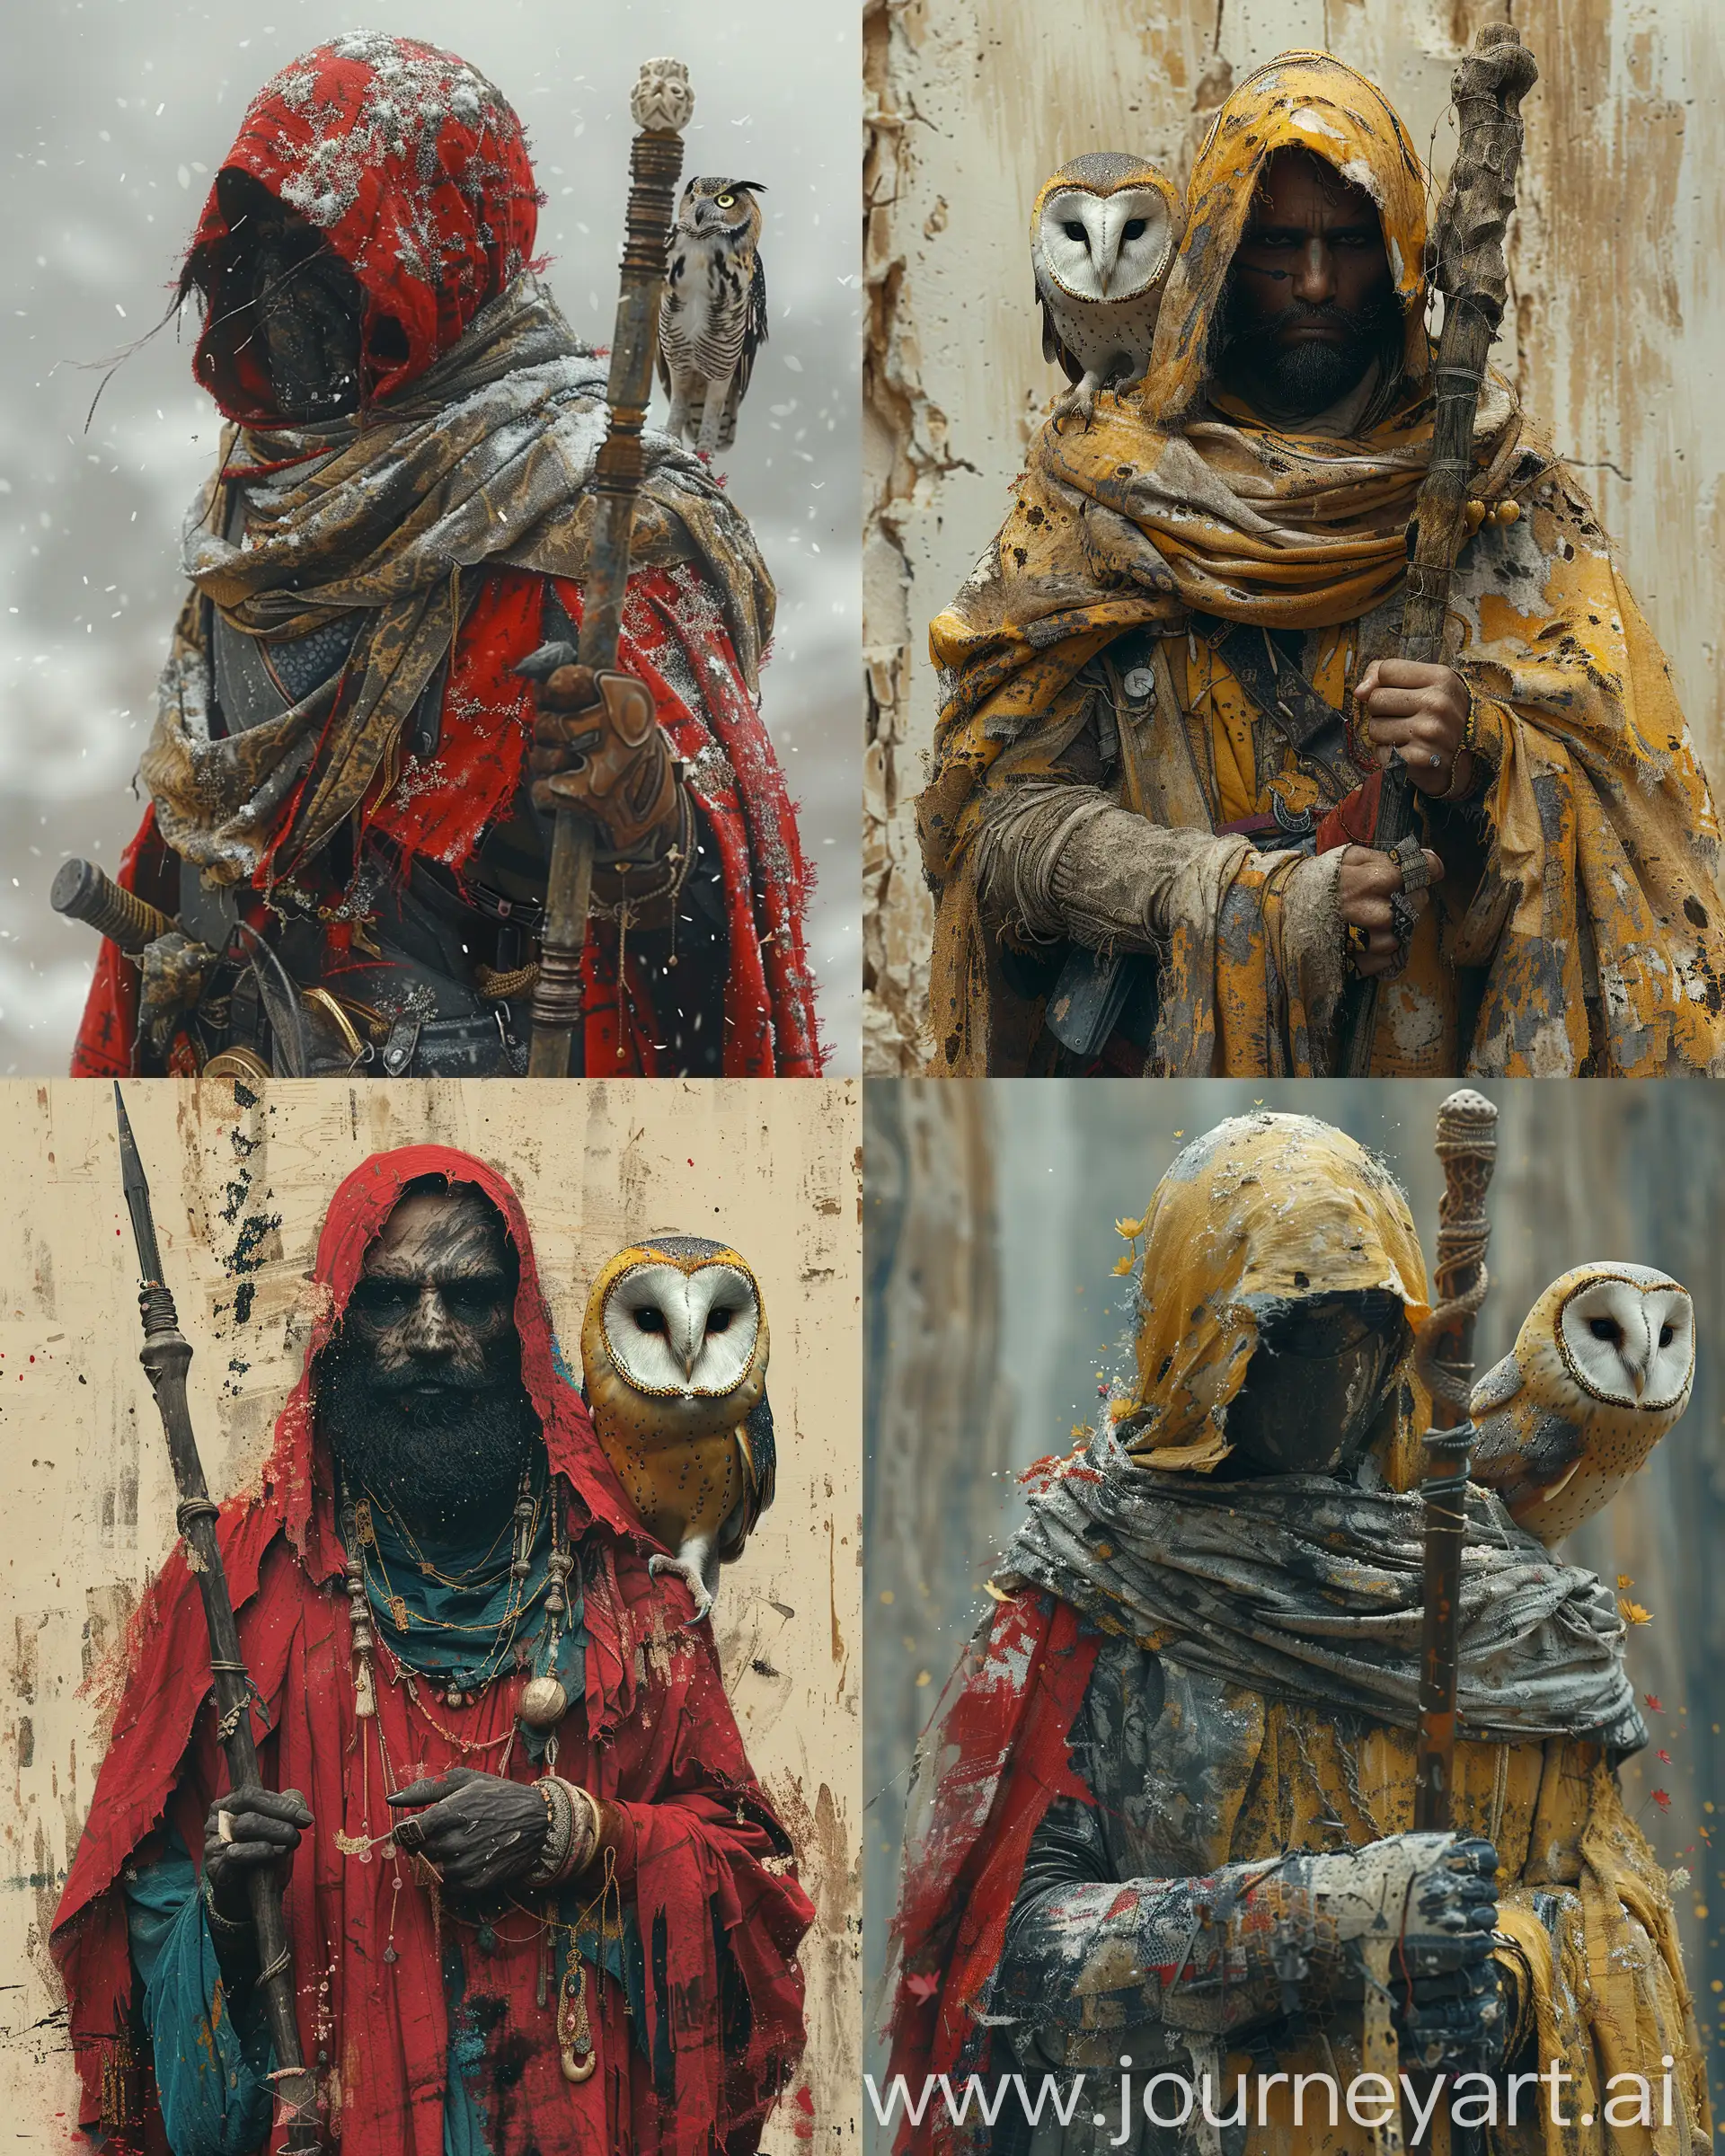 Hypermaximalist-Persian-Soldier-Mage-with-Majestic-Owl-Staff